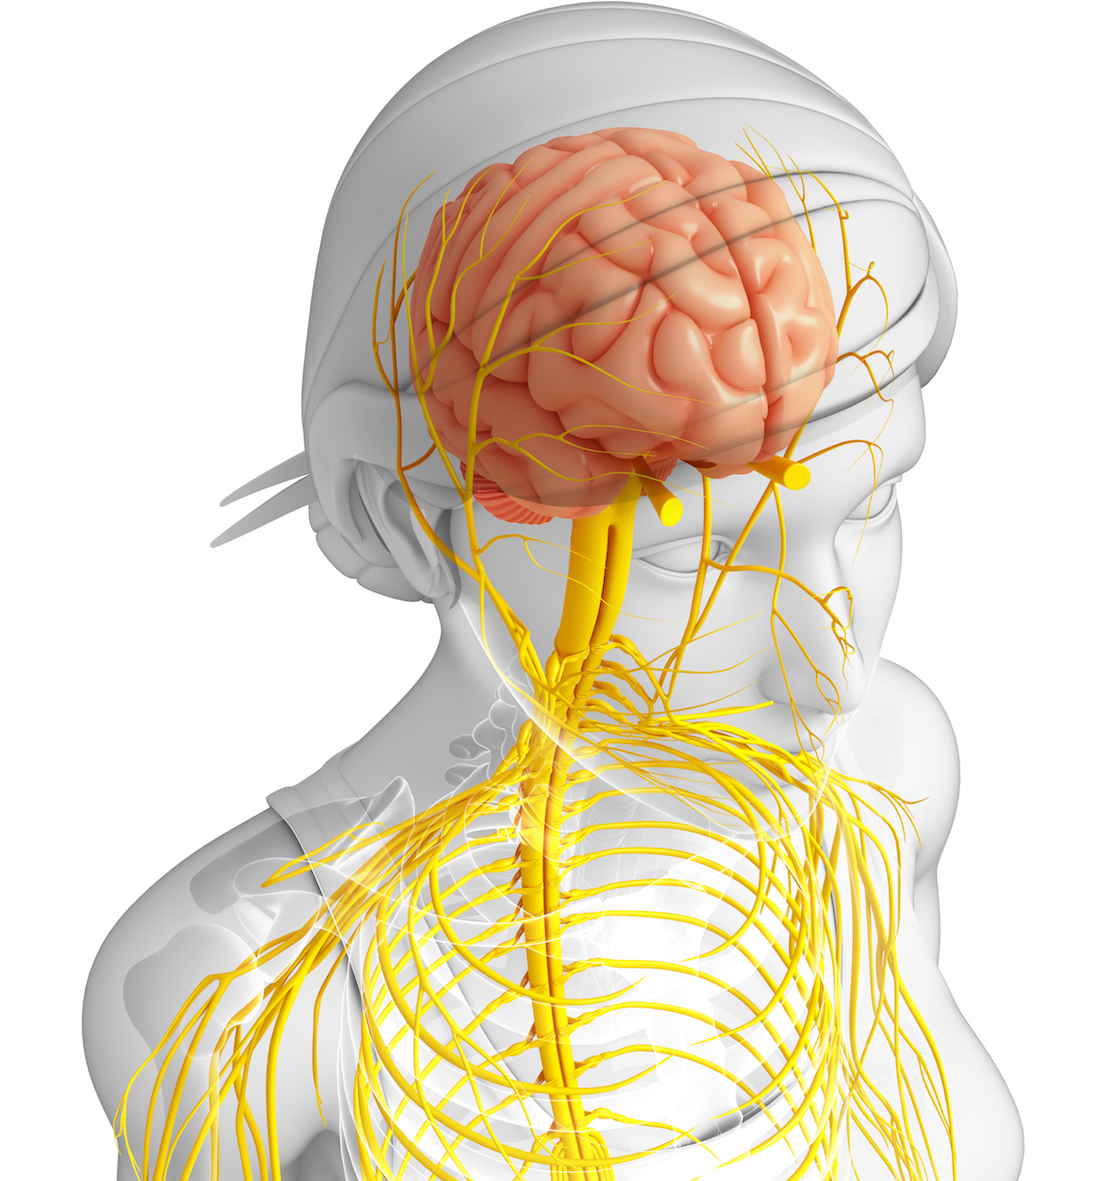 a female body showing an inside view of the nervous system and brain emphasizing the getting rid of anxiety is about changing the autonomic nervous system